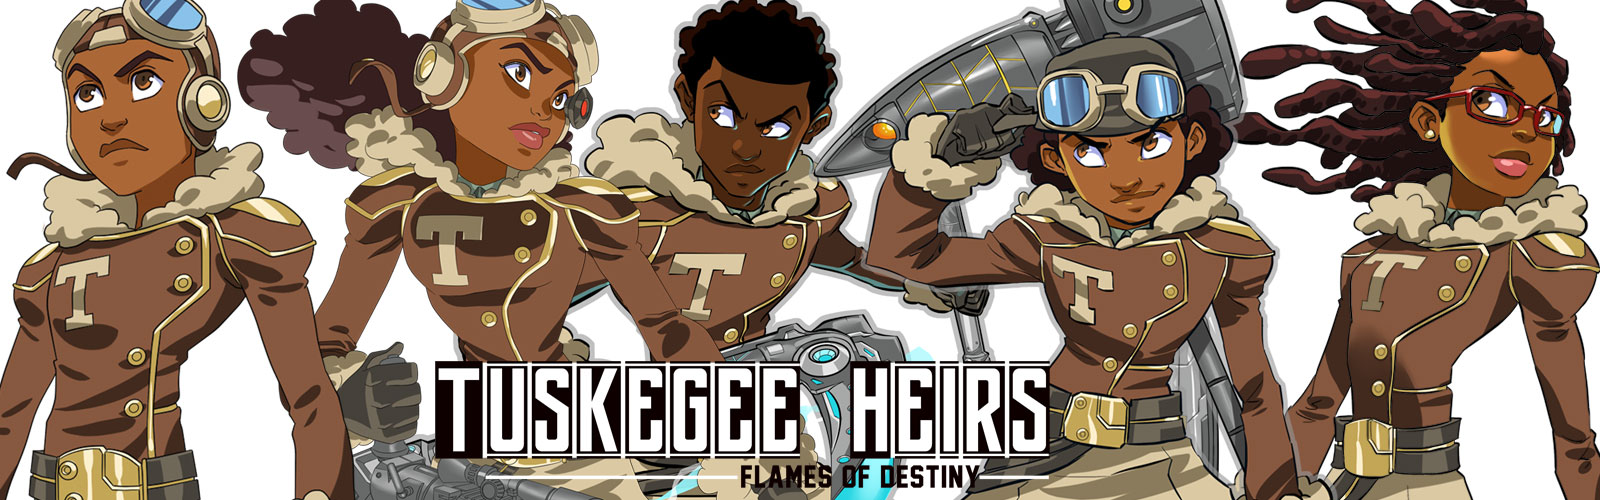 Tuskegee Heirs Flames of Destiny by Marcus Williams